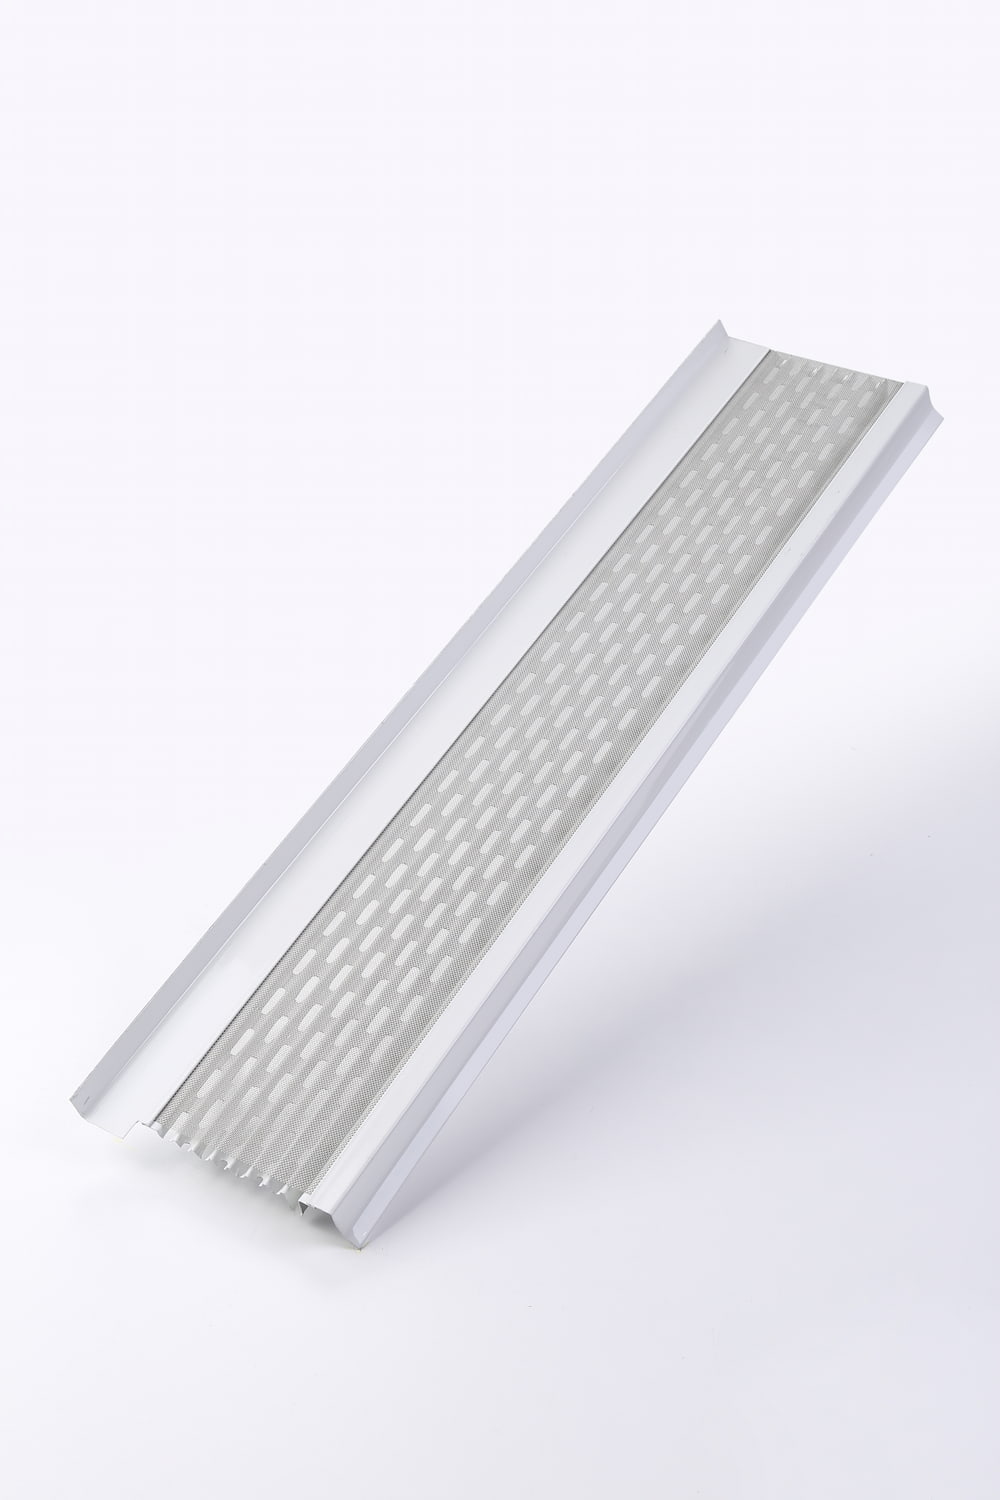 6 Inch Micromesh Gutter Guards White